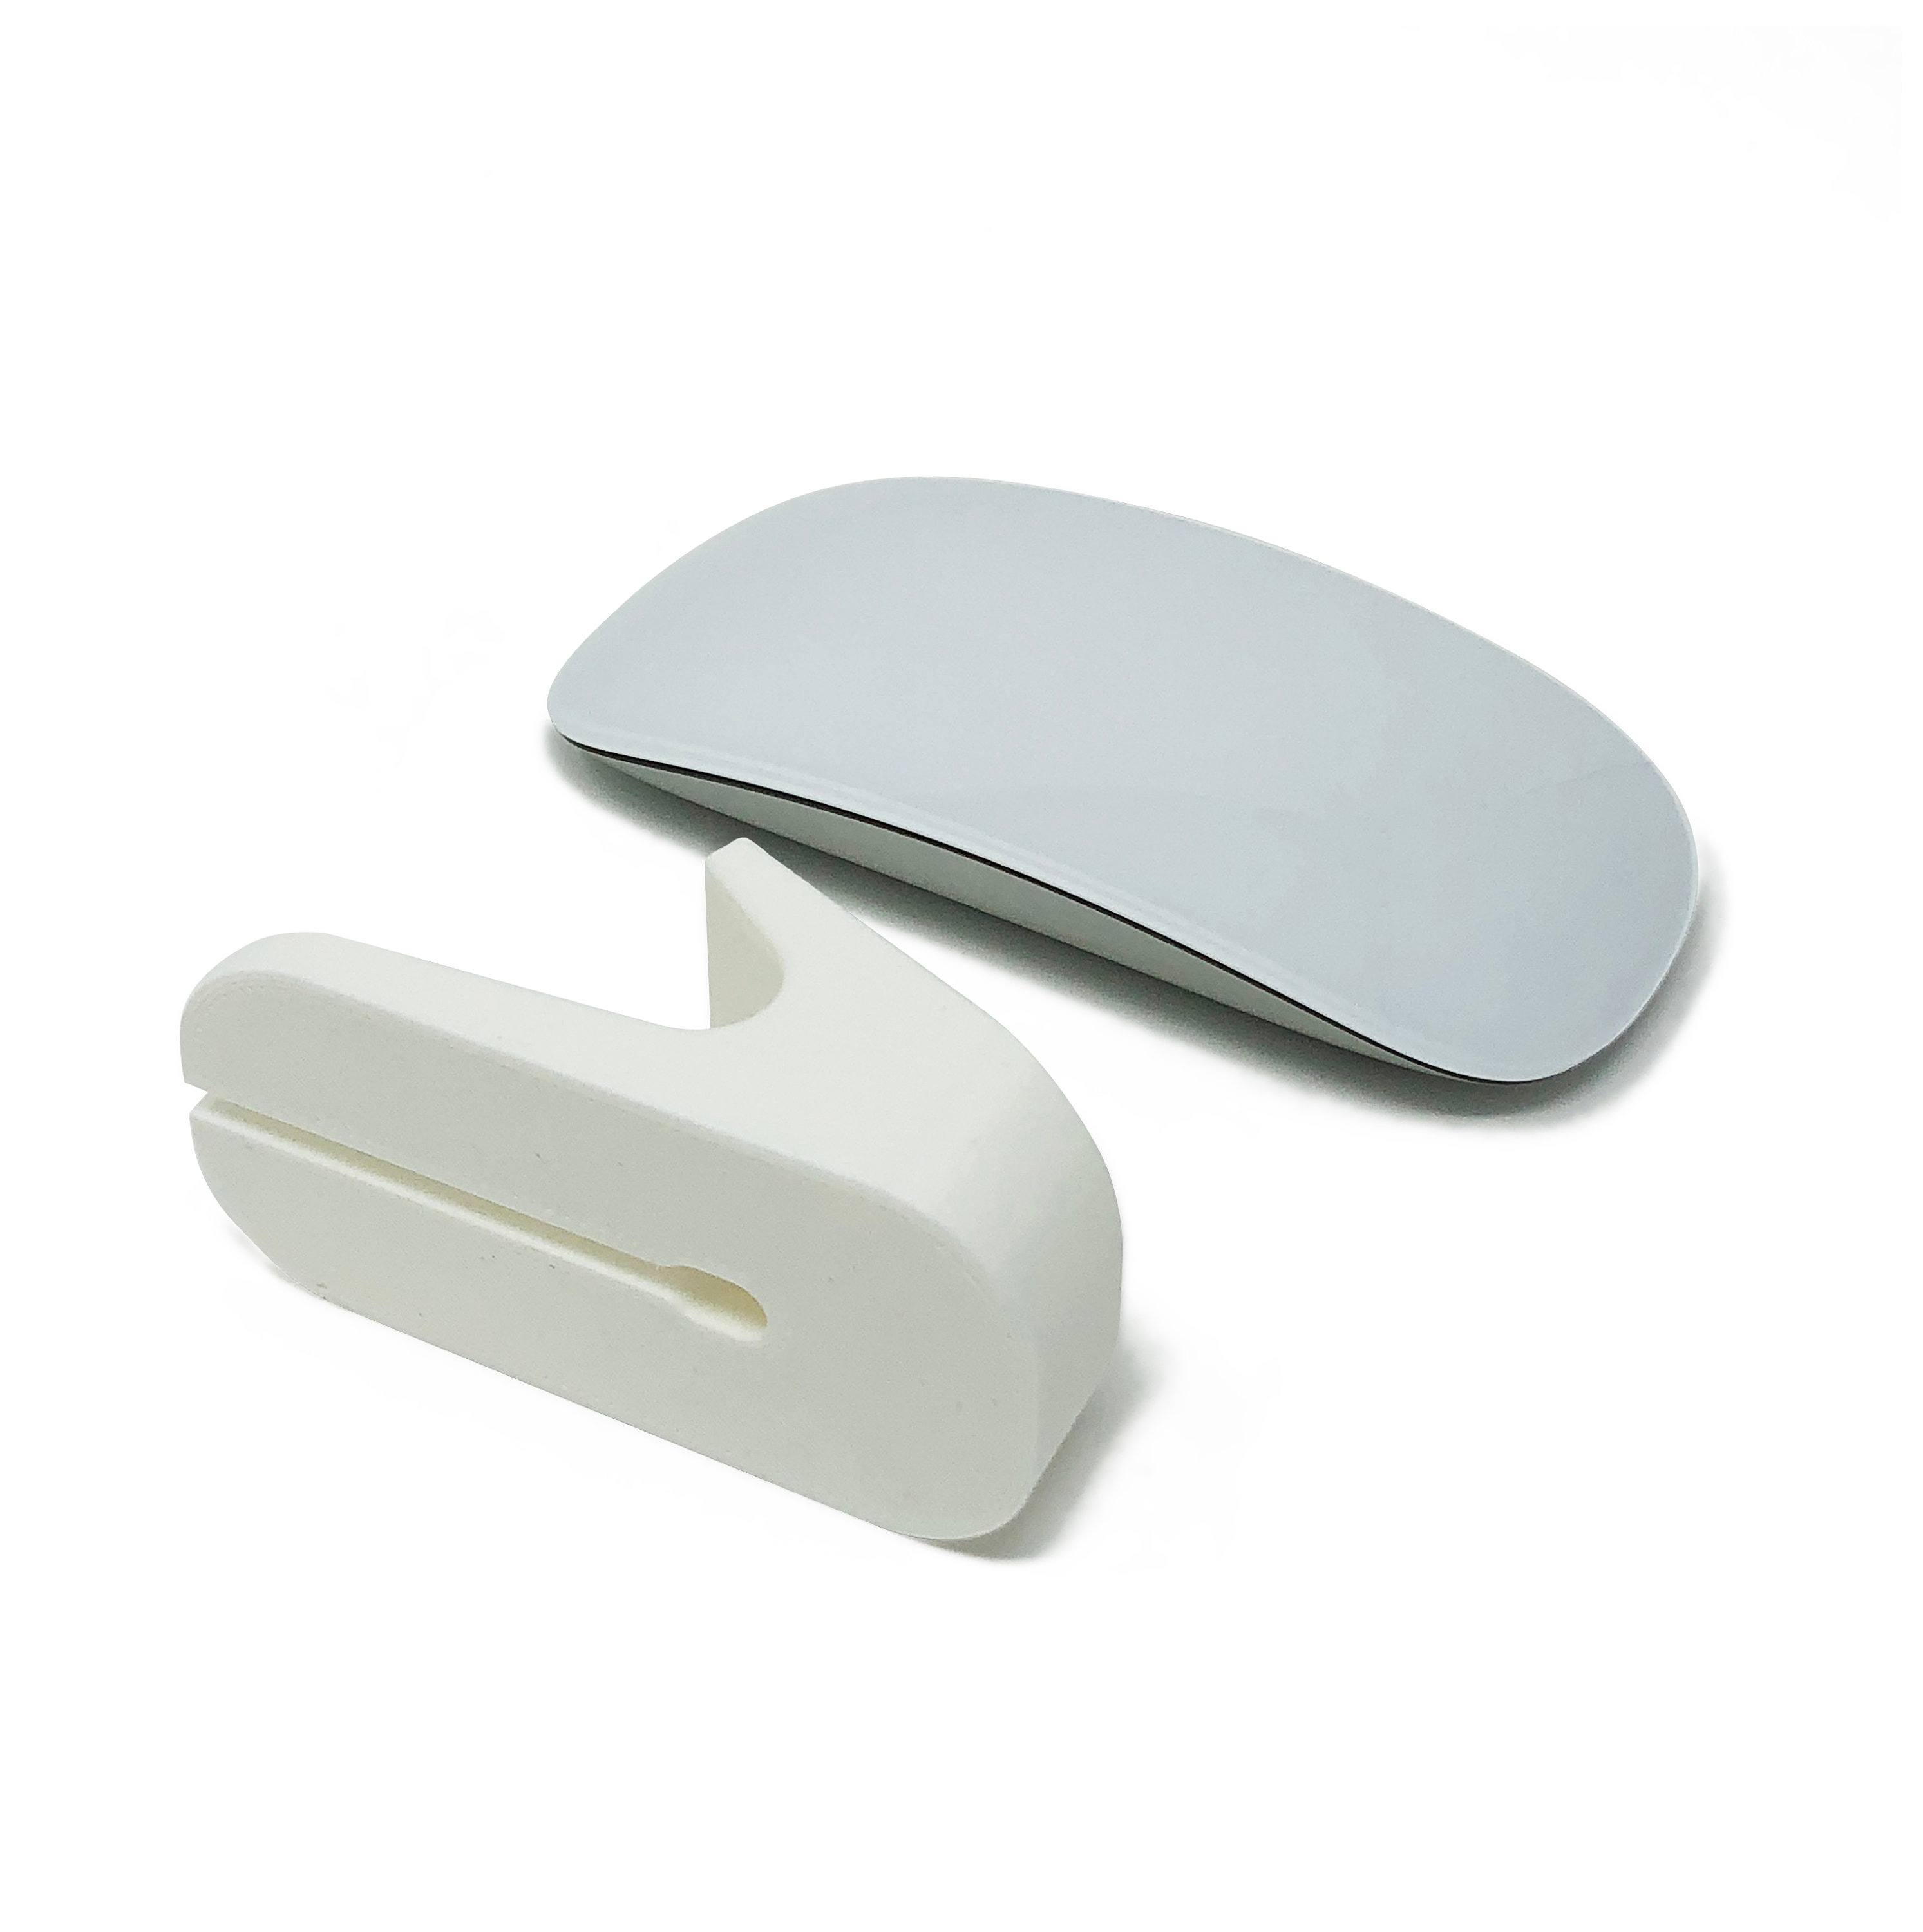 Charging Dock for Apple Magic Mouse 2 3D Printed Charger Dock